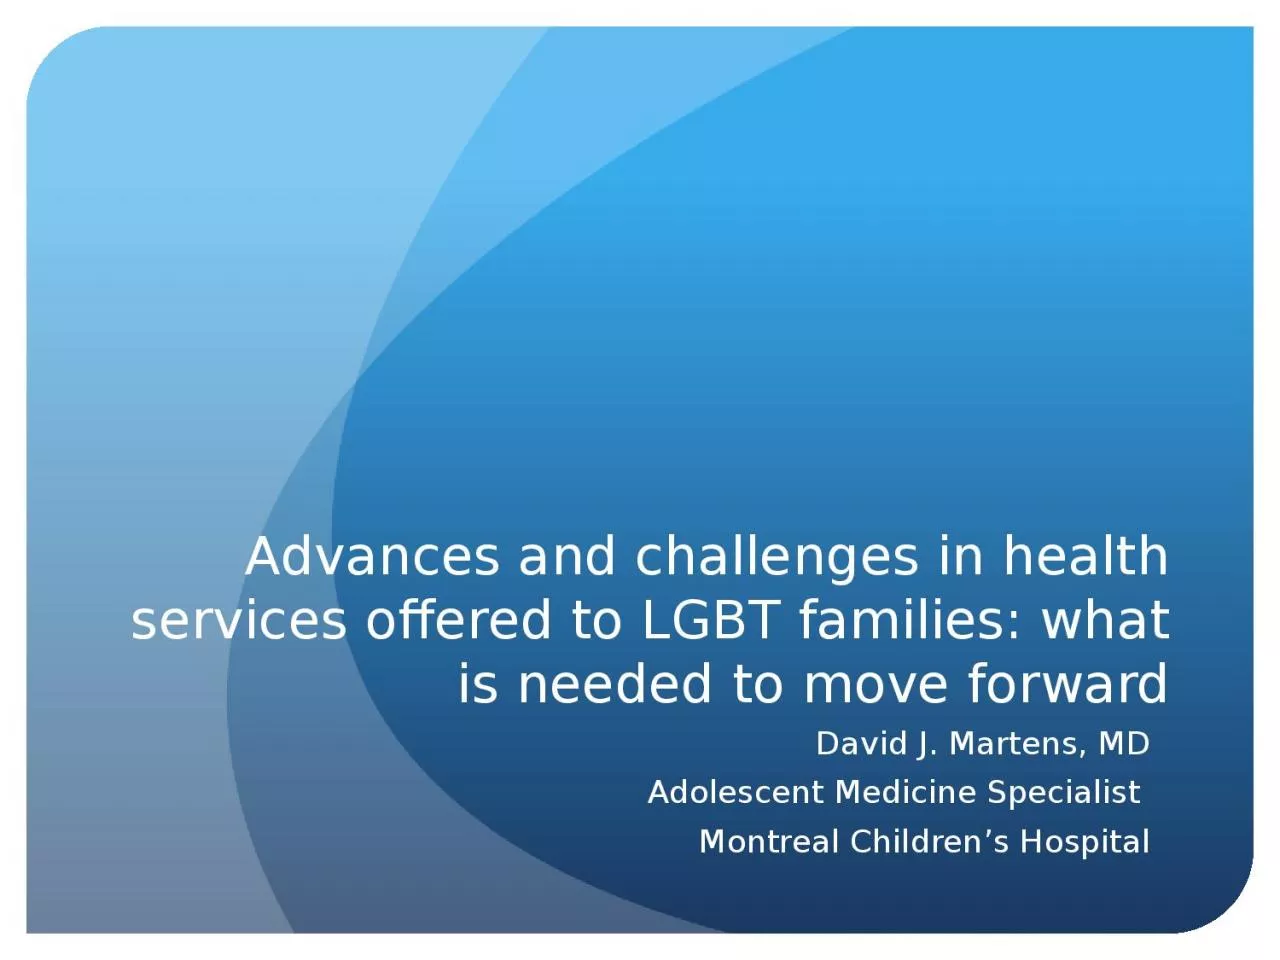 Advances and challenges in health services offered to LGBT families: what is needed to